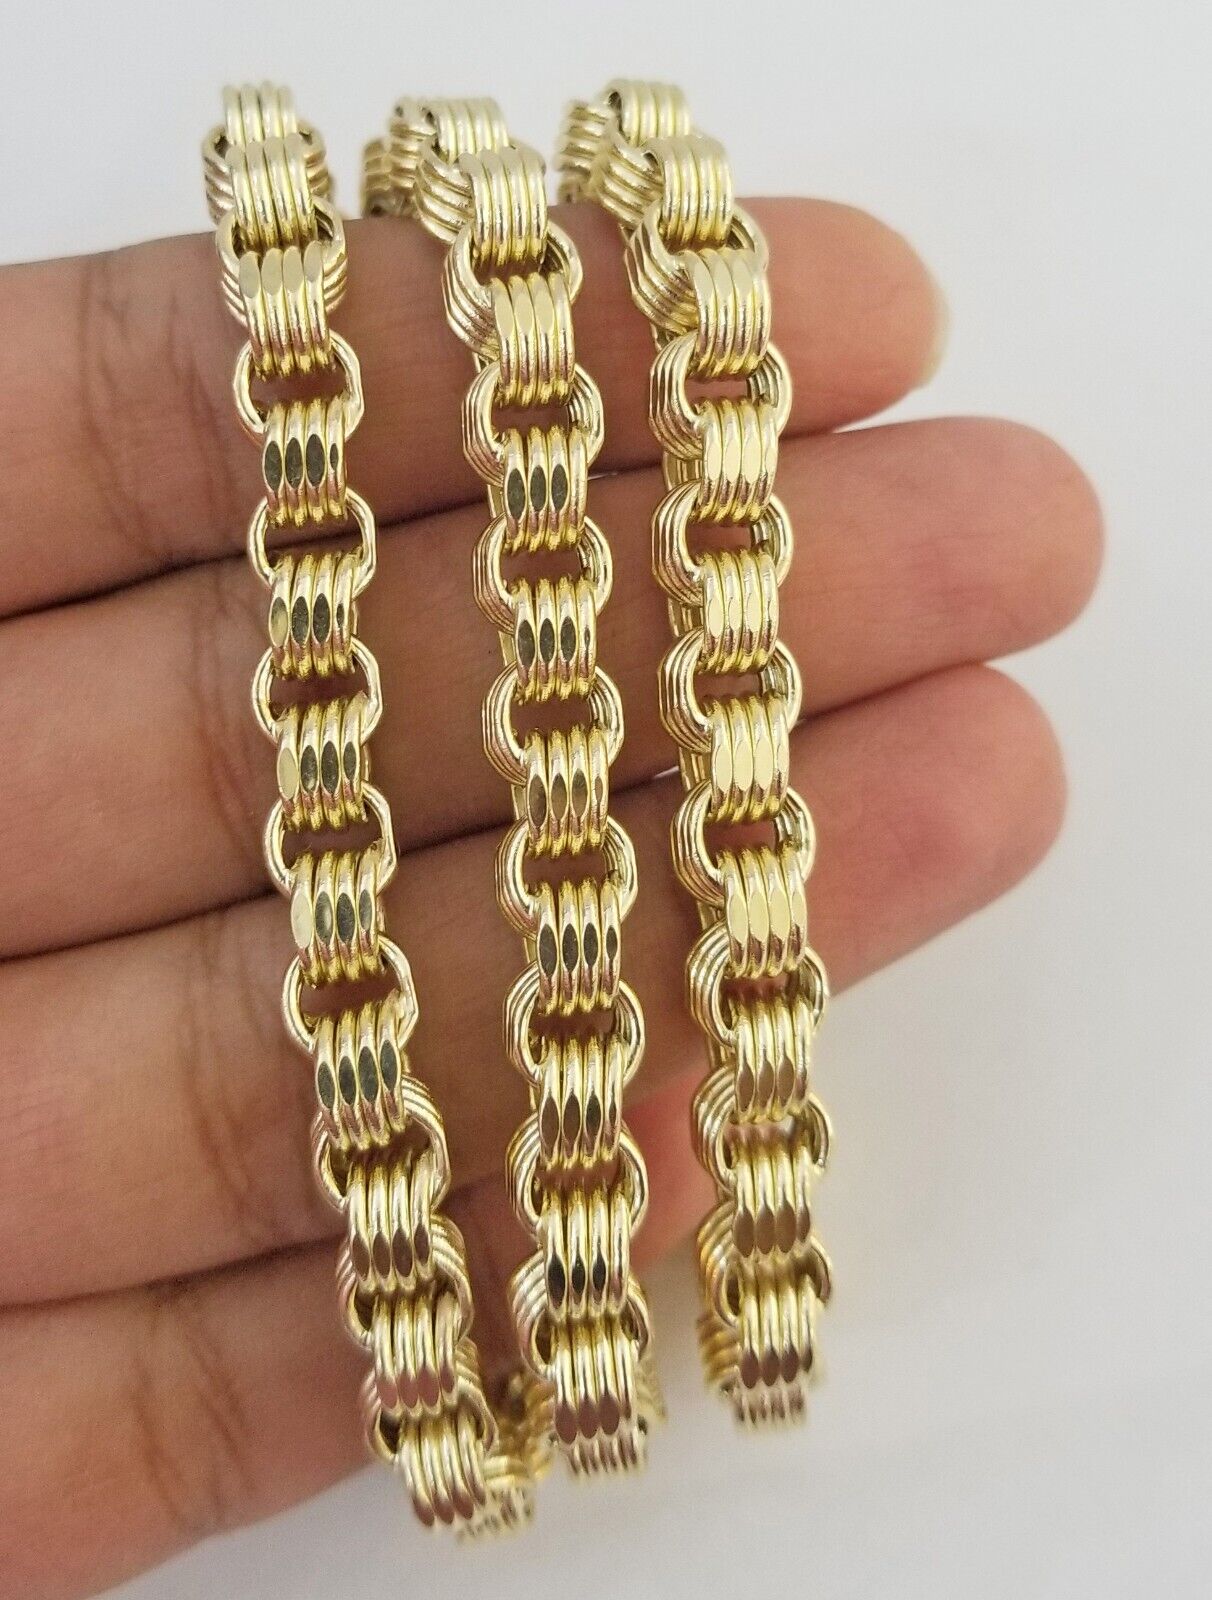 REAL 10k Yellow Gold Byzantine Chain Men's Necklace 6.5mm 24 Inch, 10kt gold